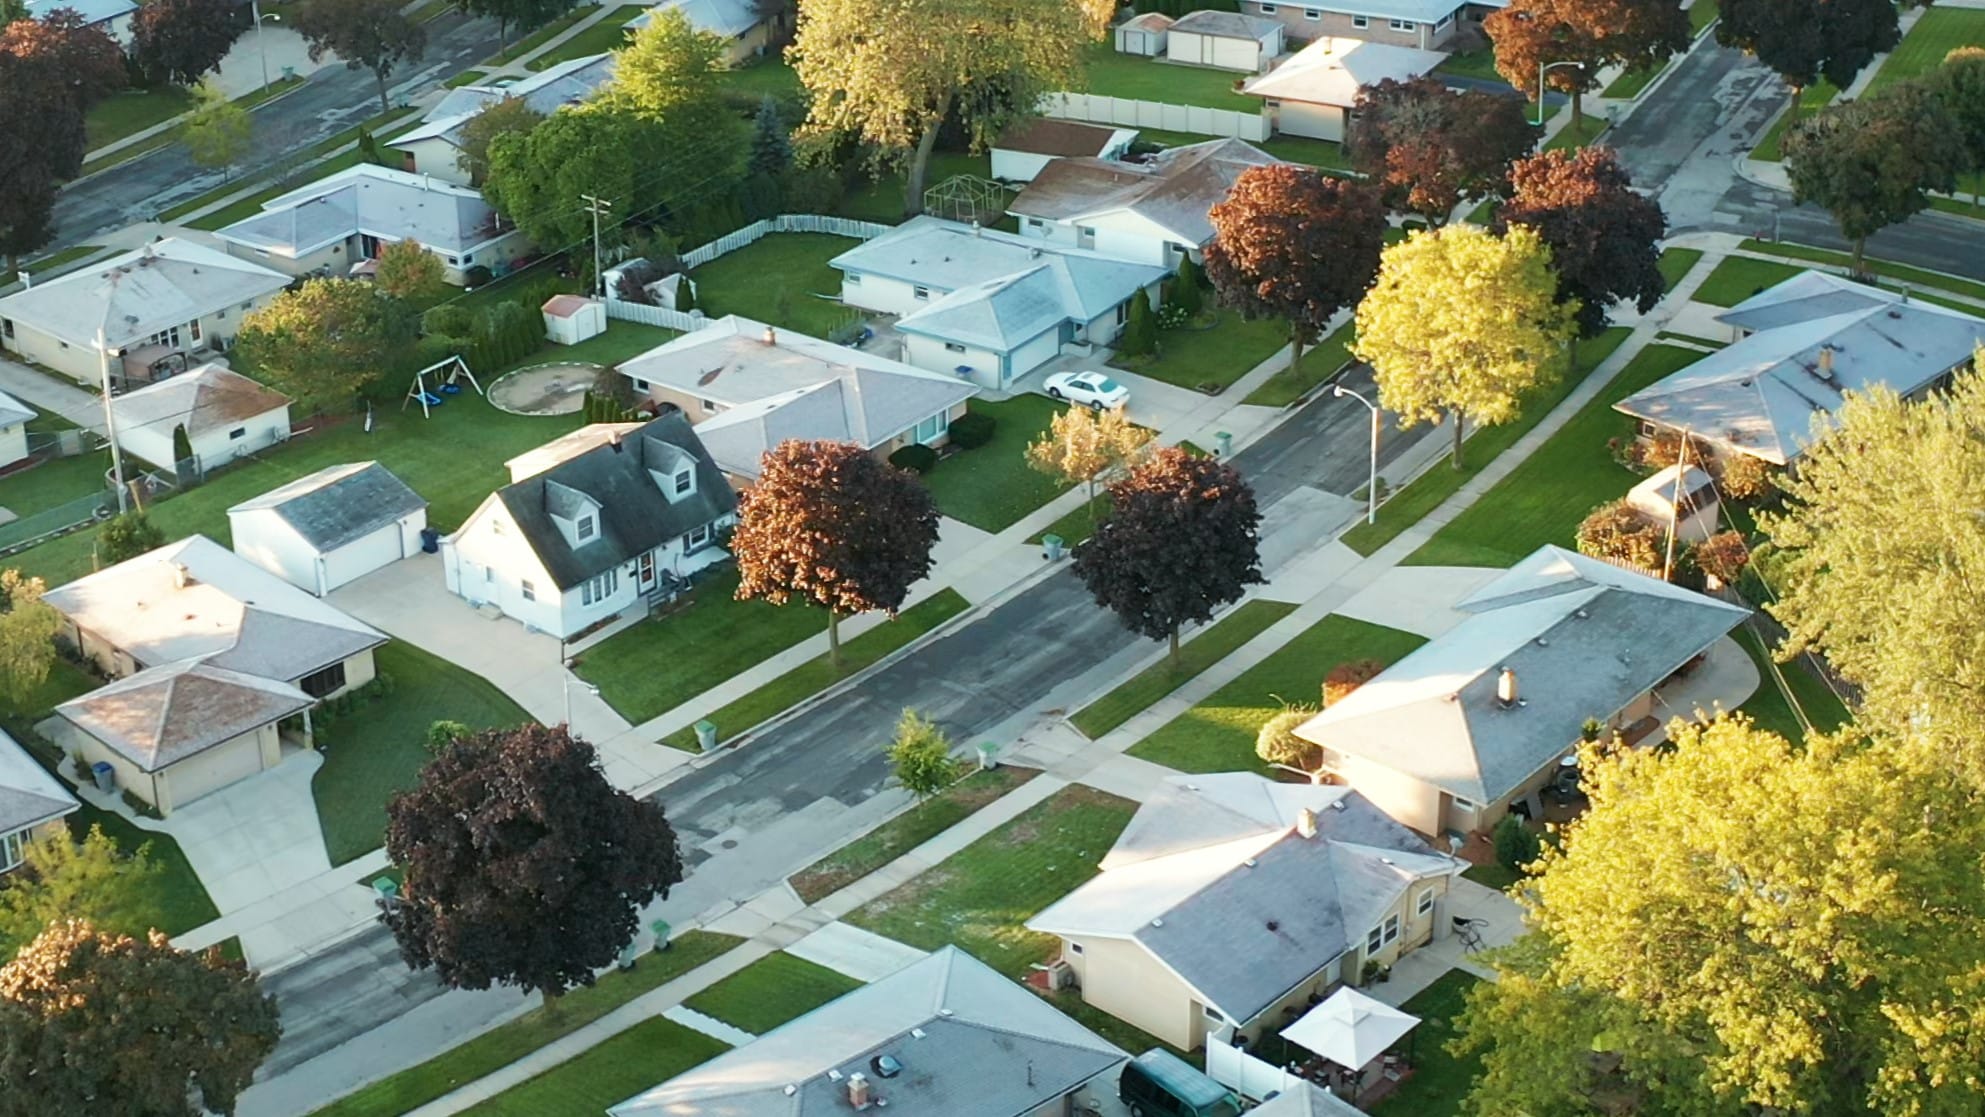 An aerial view of a neighborhood surrounded by green trees.